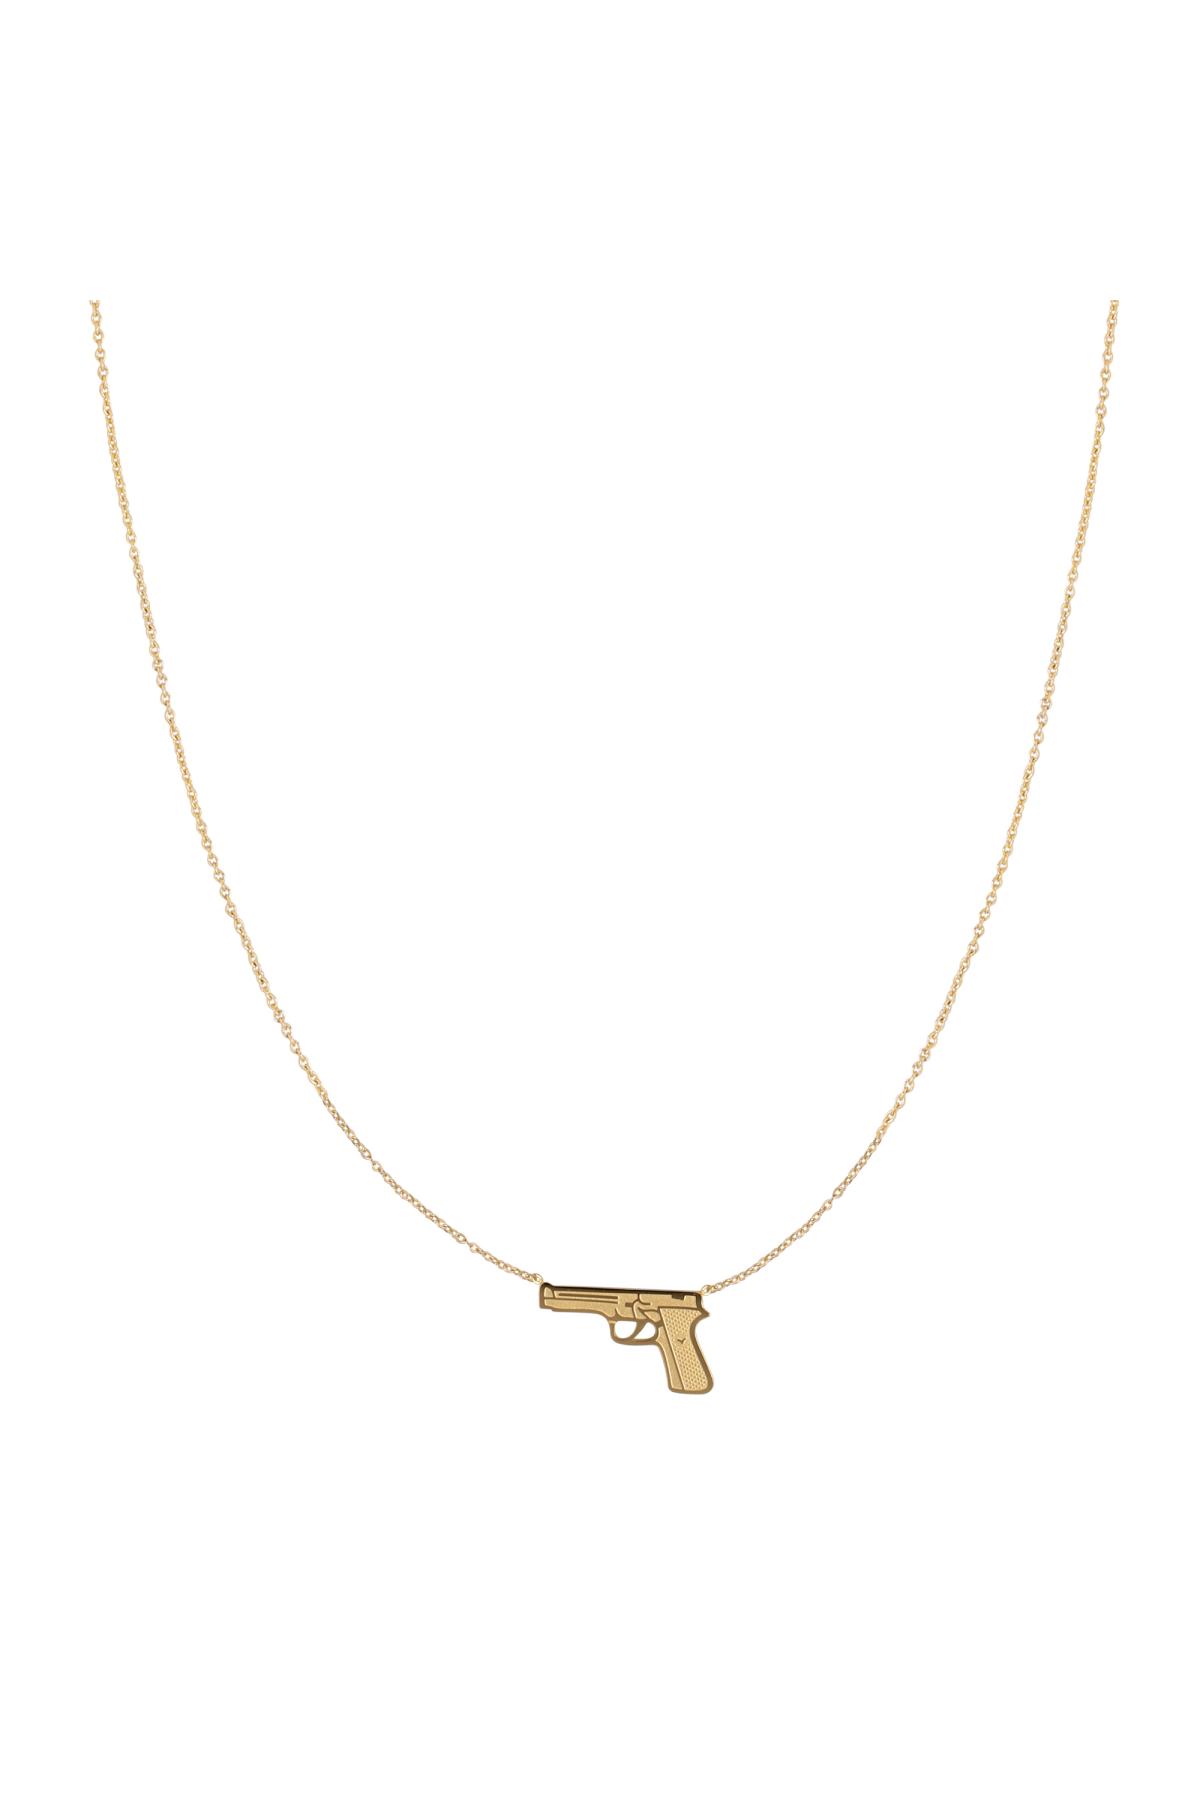 Stainless Steel Gun Shaped Pendant Necklace - Gold 